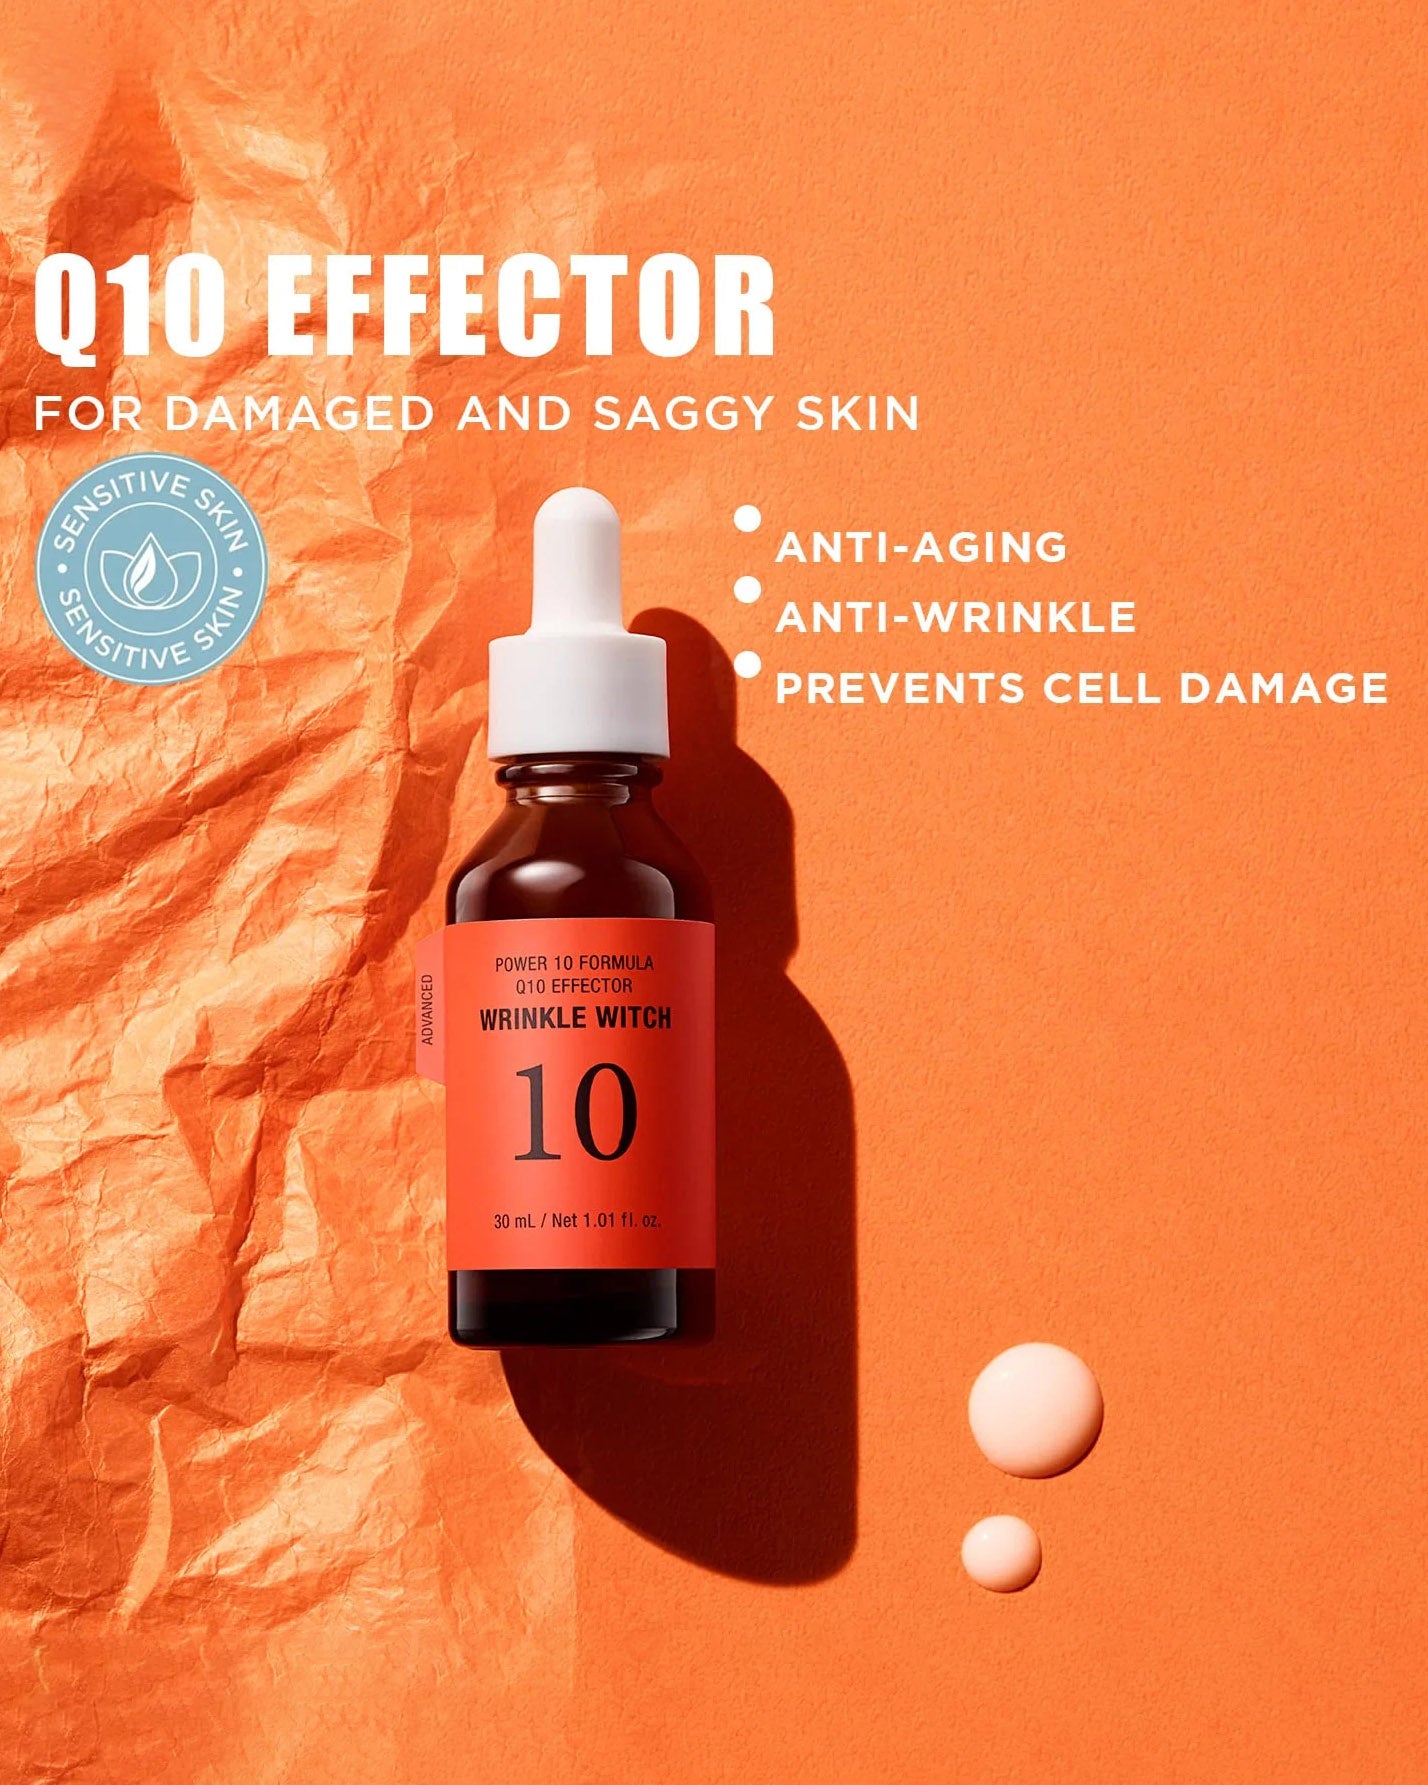 It's Skin Power 10 Formula Q10 Effector AD Wrinkle Witch